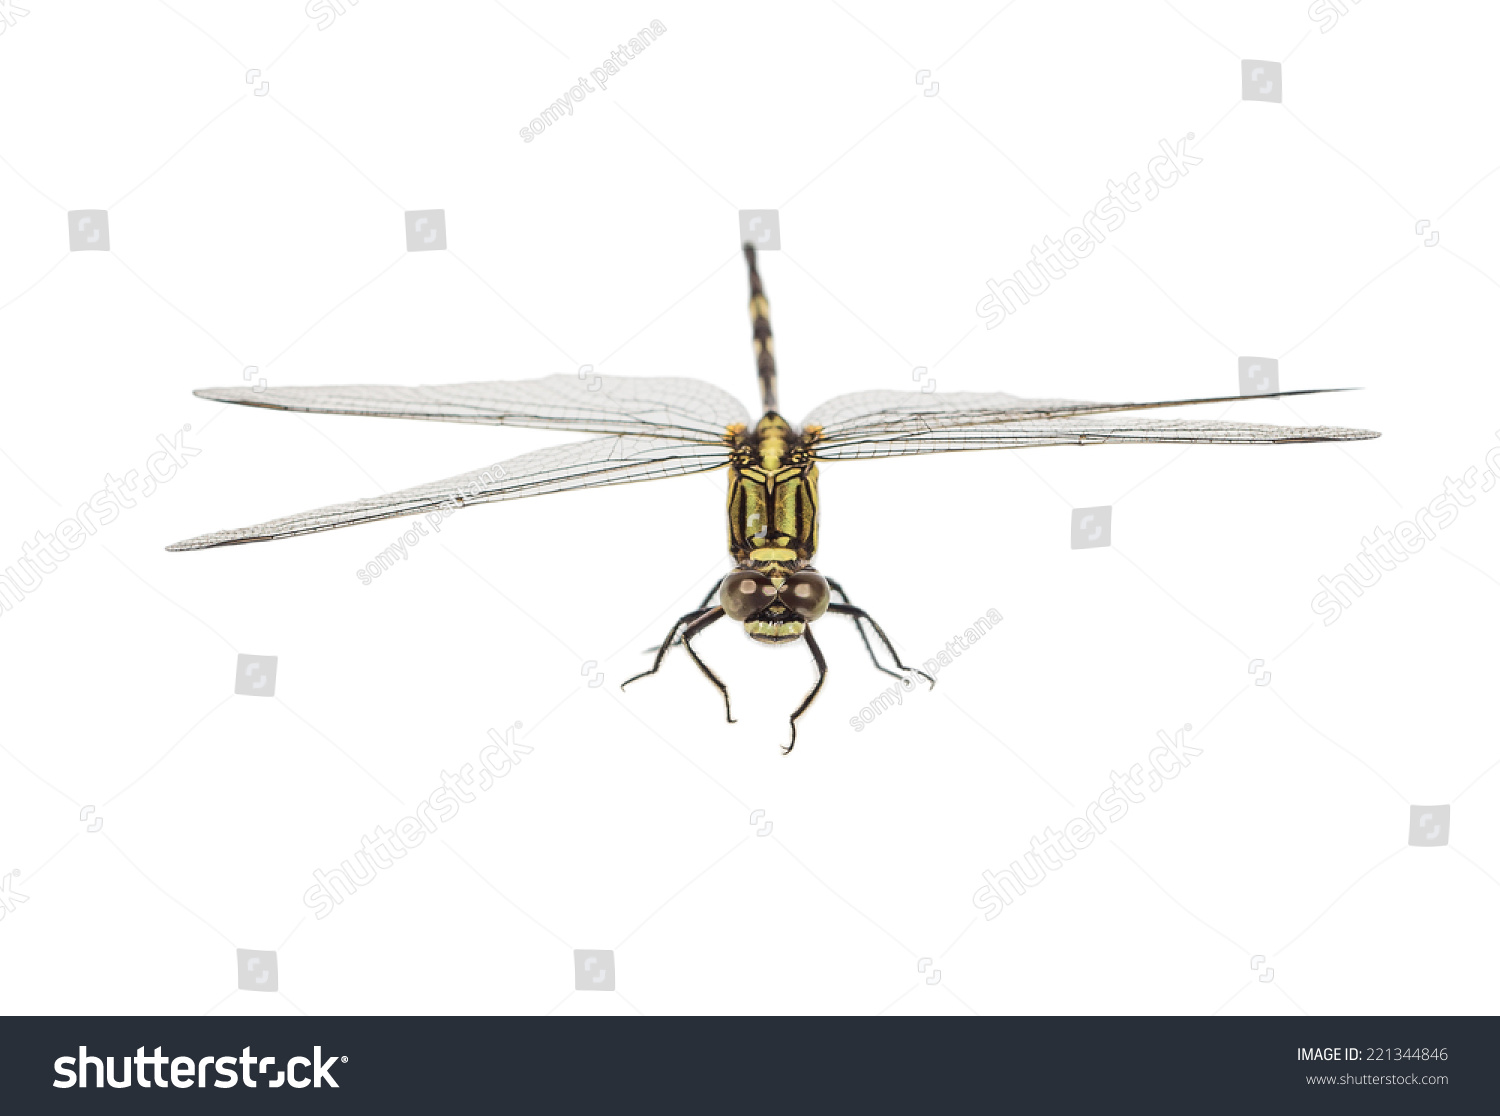 Dragonfly Isolated On White Stock Photo 221344846 - Shutterstock